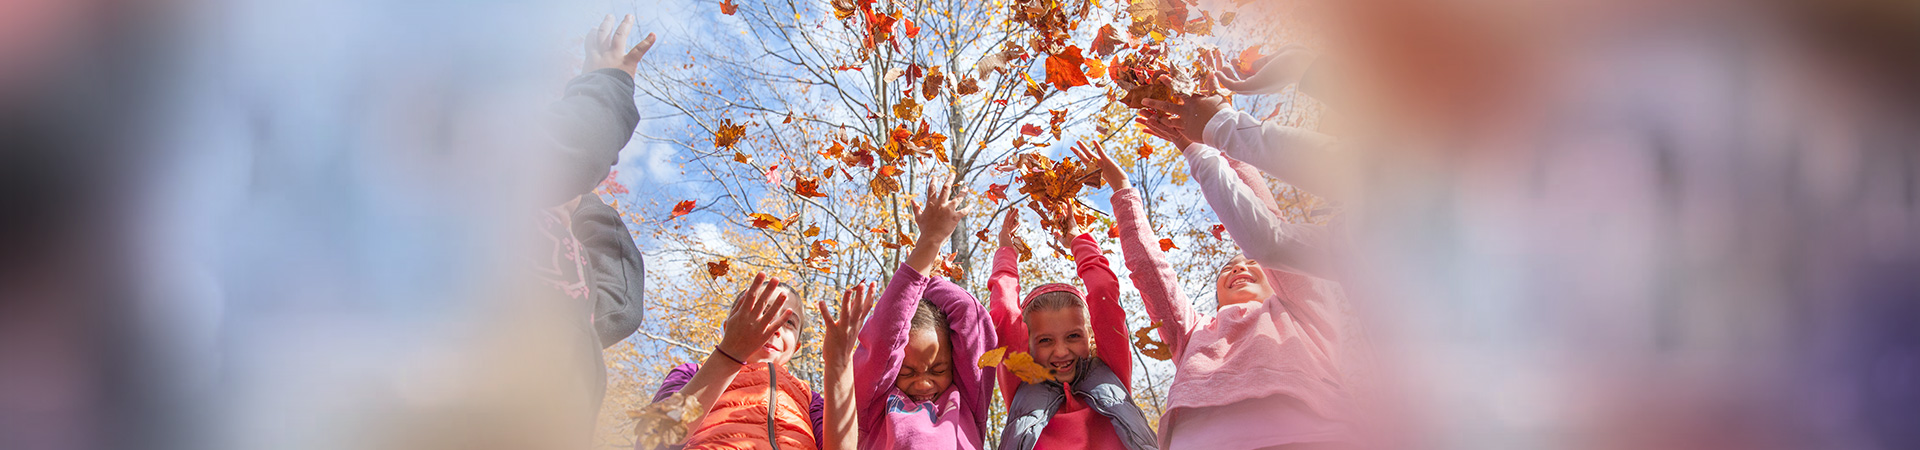  girls tossing fall leaves into the air 